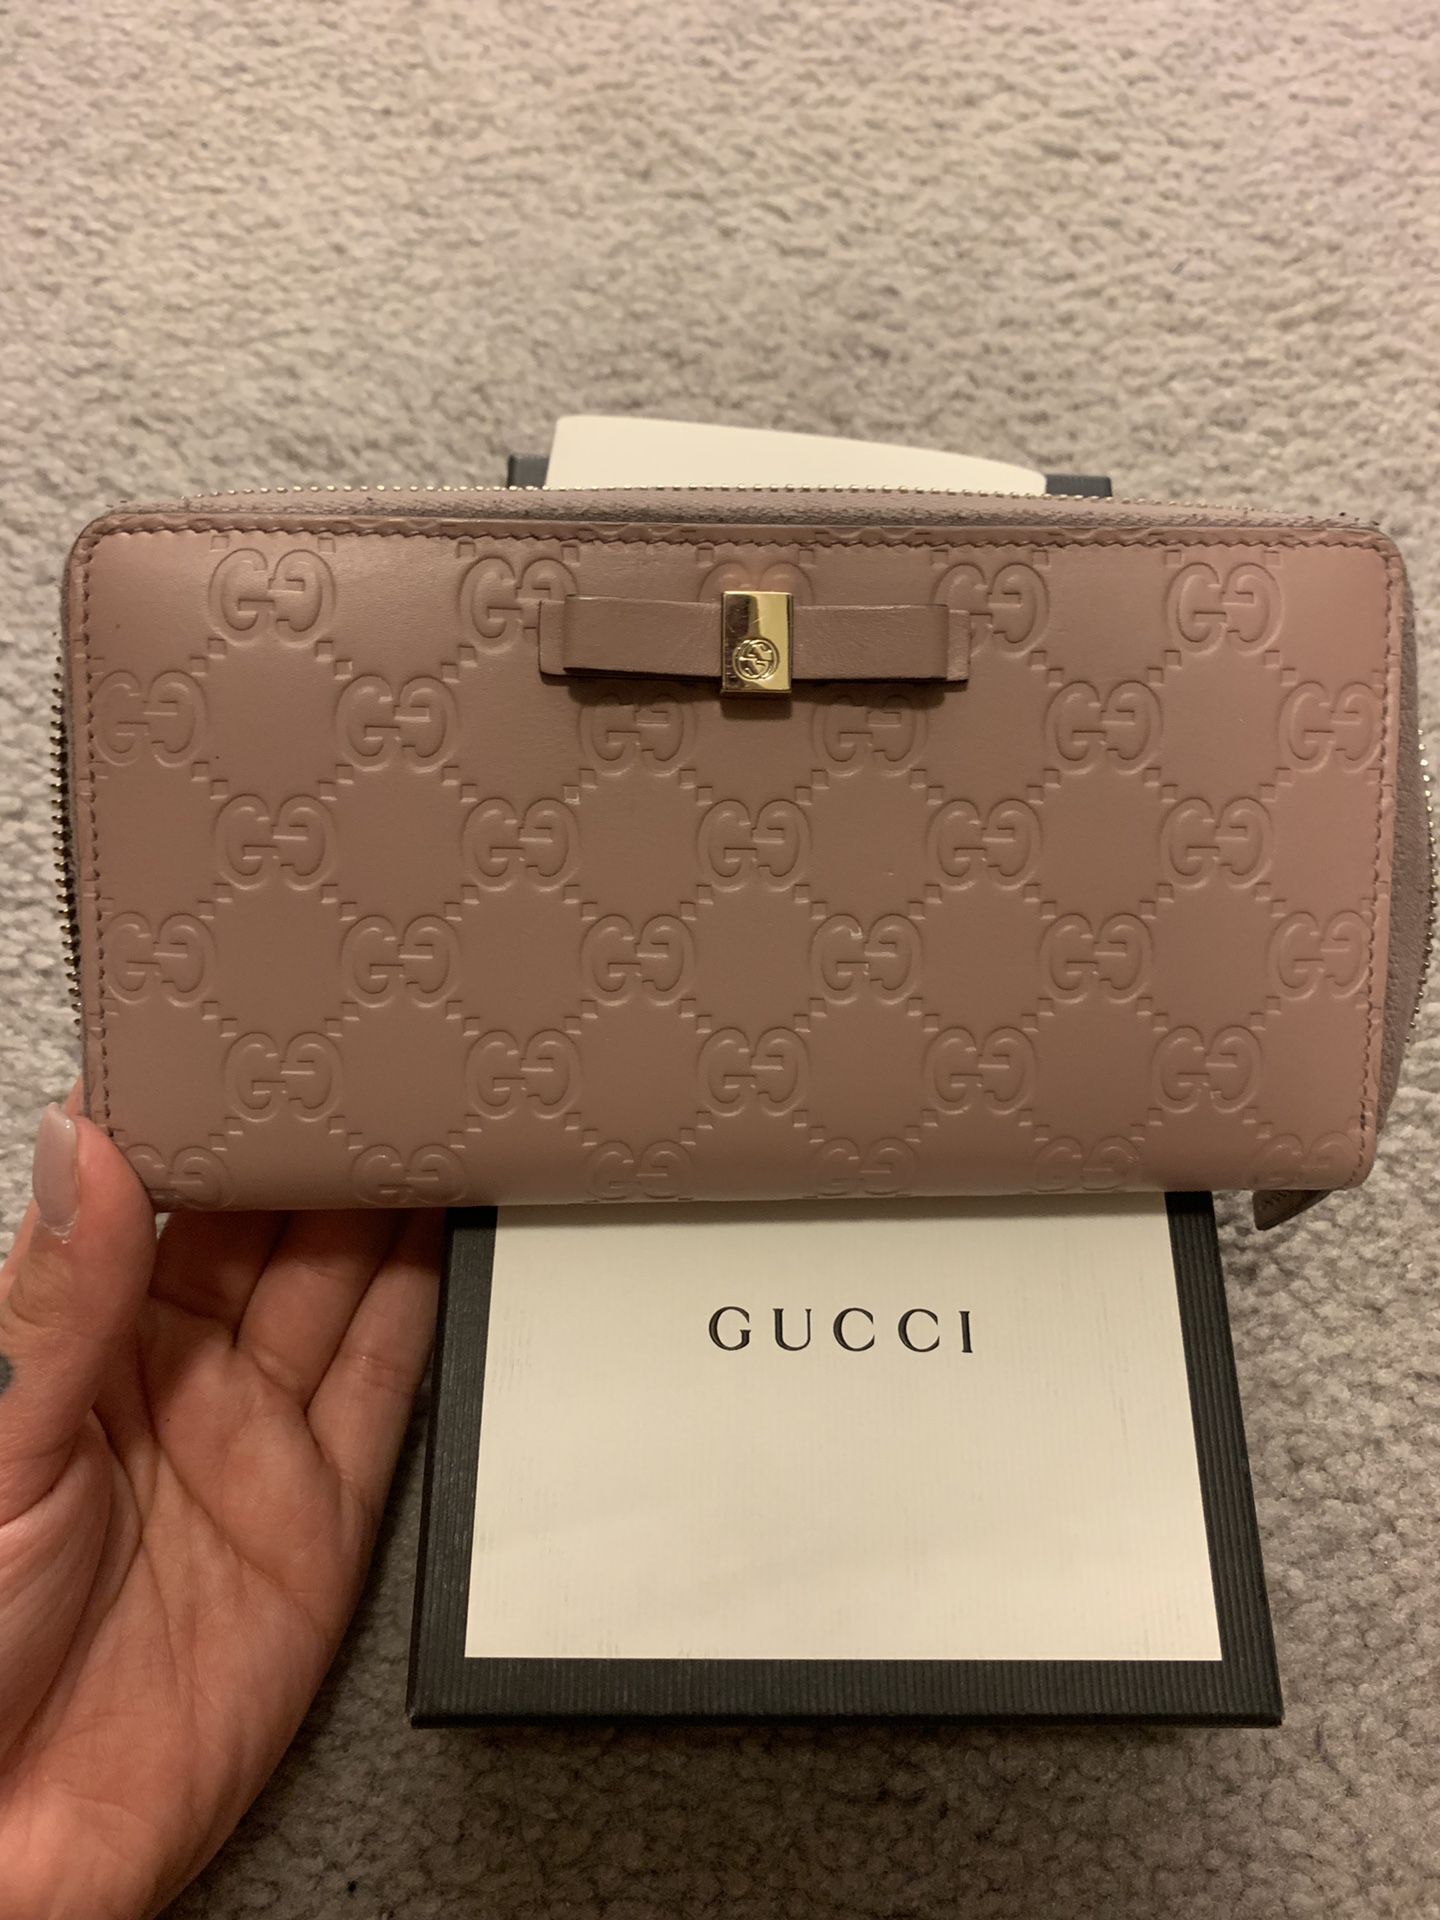 *AUTHENTIC* GUCCI WALLET